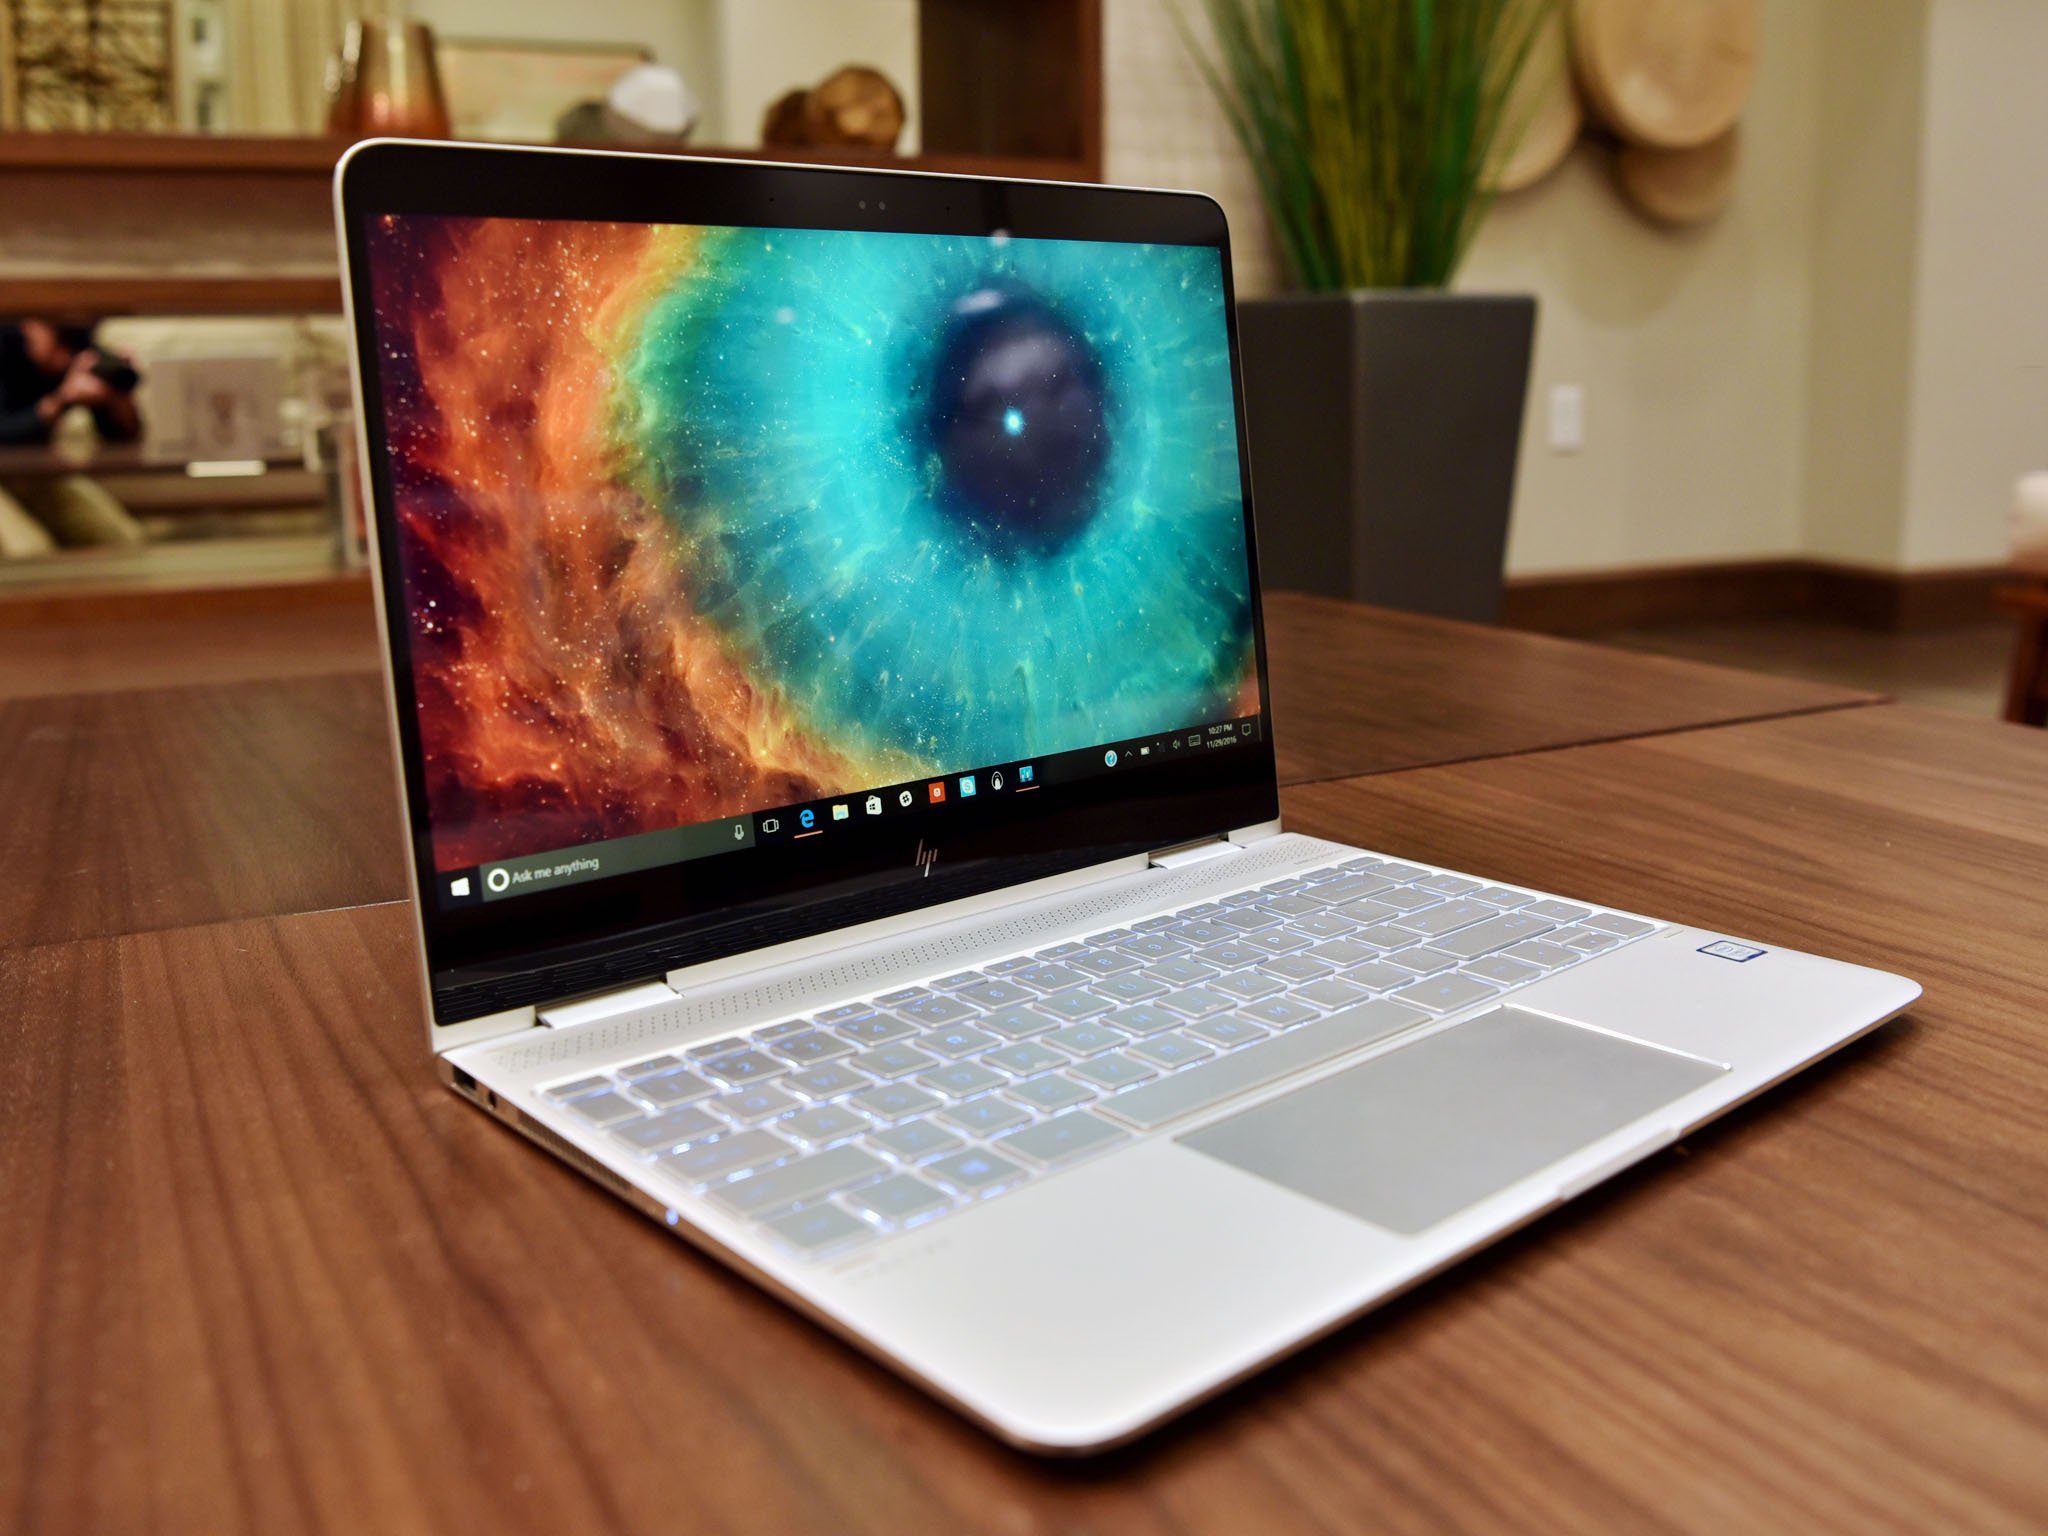 HP Spectre x360 (late-2016) review: the new best 13-inch laptop